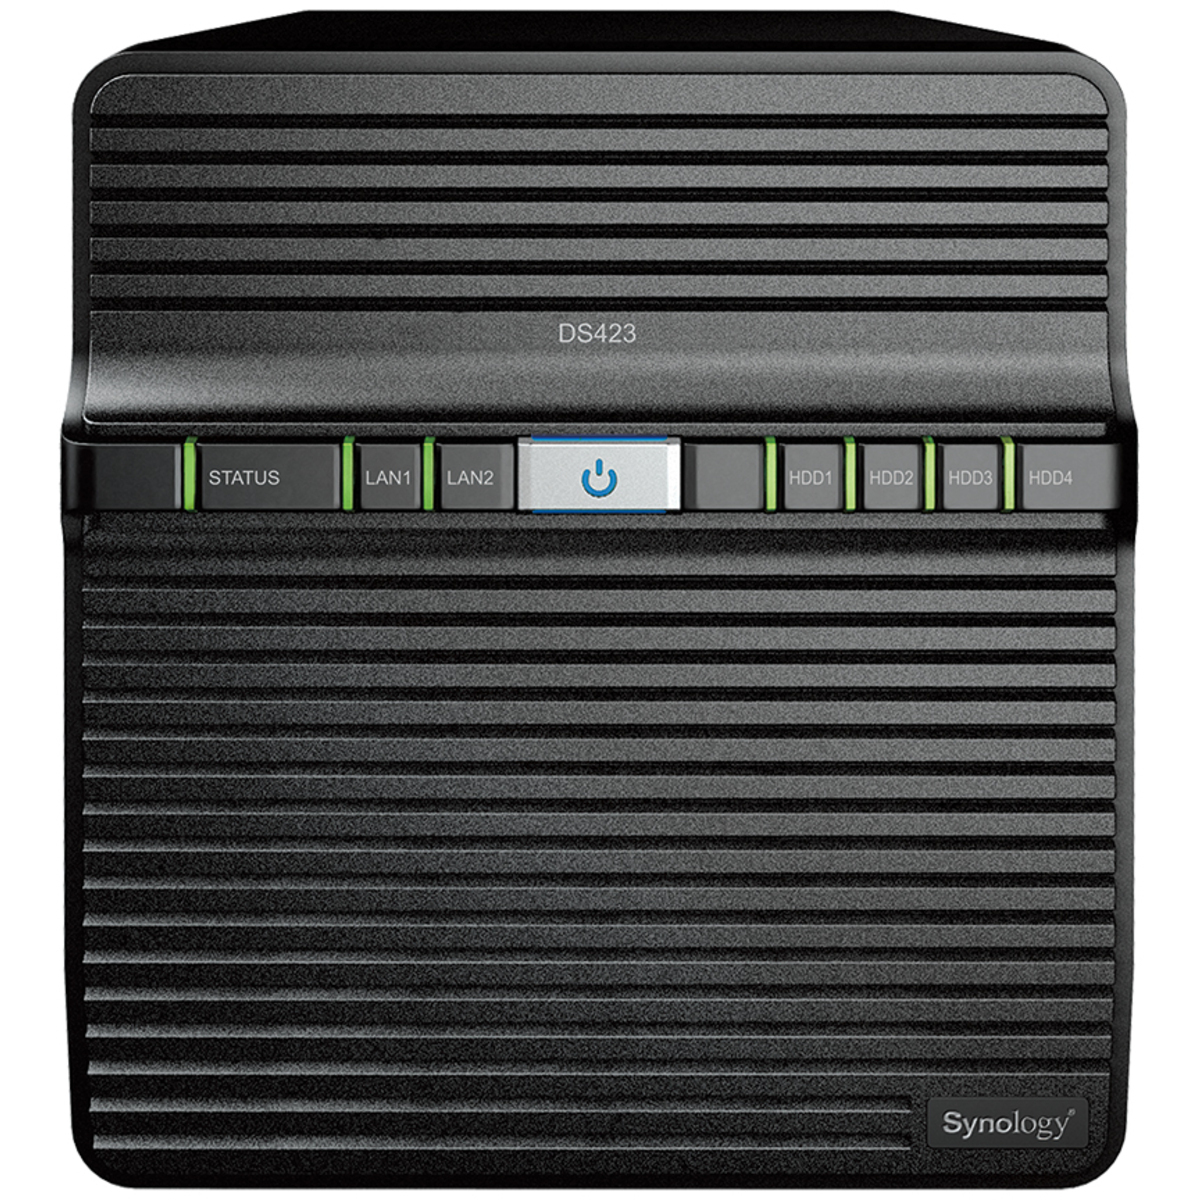 Synology DiskStation DS423 28tb 4-Bay Desktop Personal / Basic Home / Small Office NAS - Network Attached Storage Device 2x14tb Seagate IronWolf Pro ST14000NT001 3.5 7200rpm SATA 6Gb/s HDD NAS Class Drives Installed - Burn-In Tested DiskStation DS423